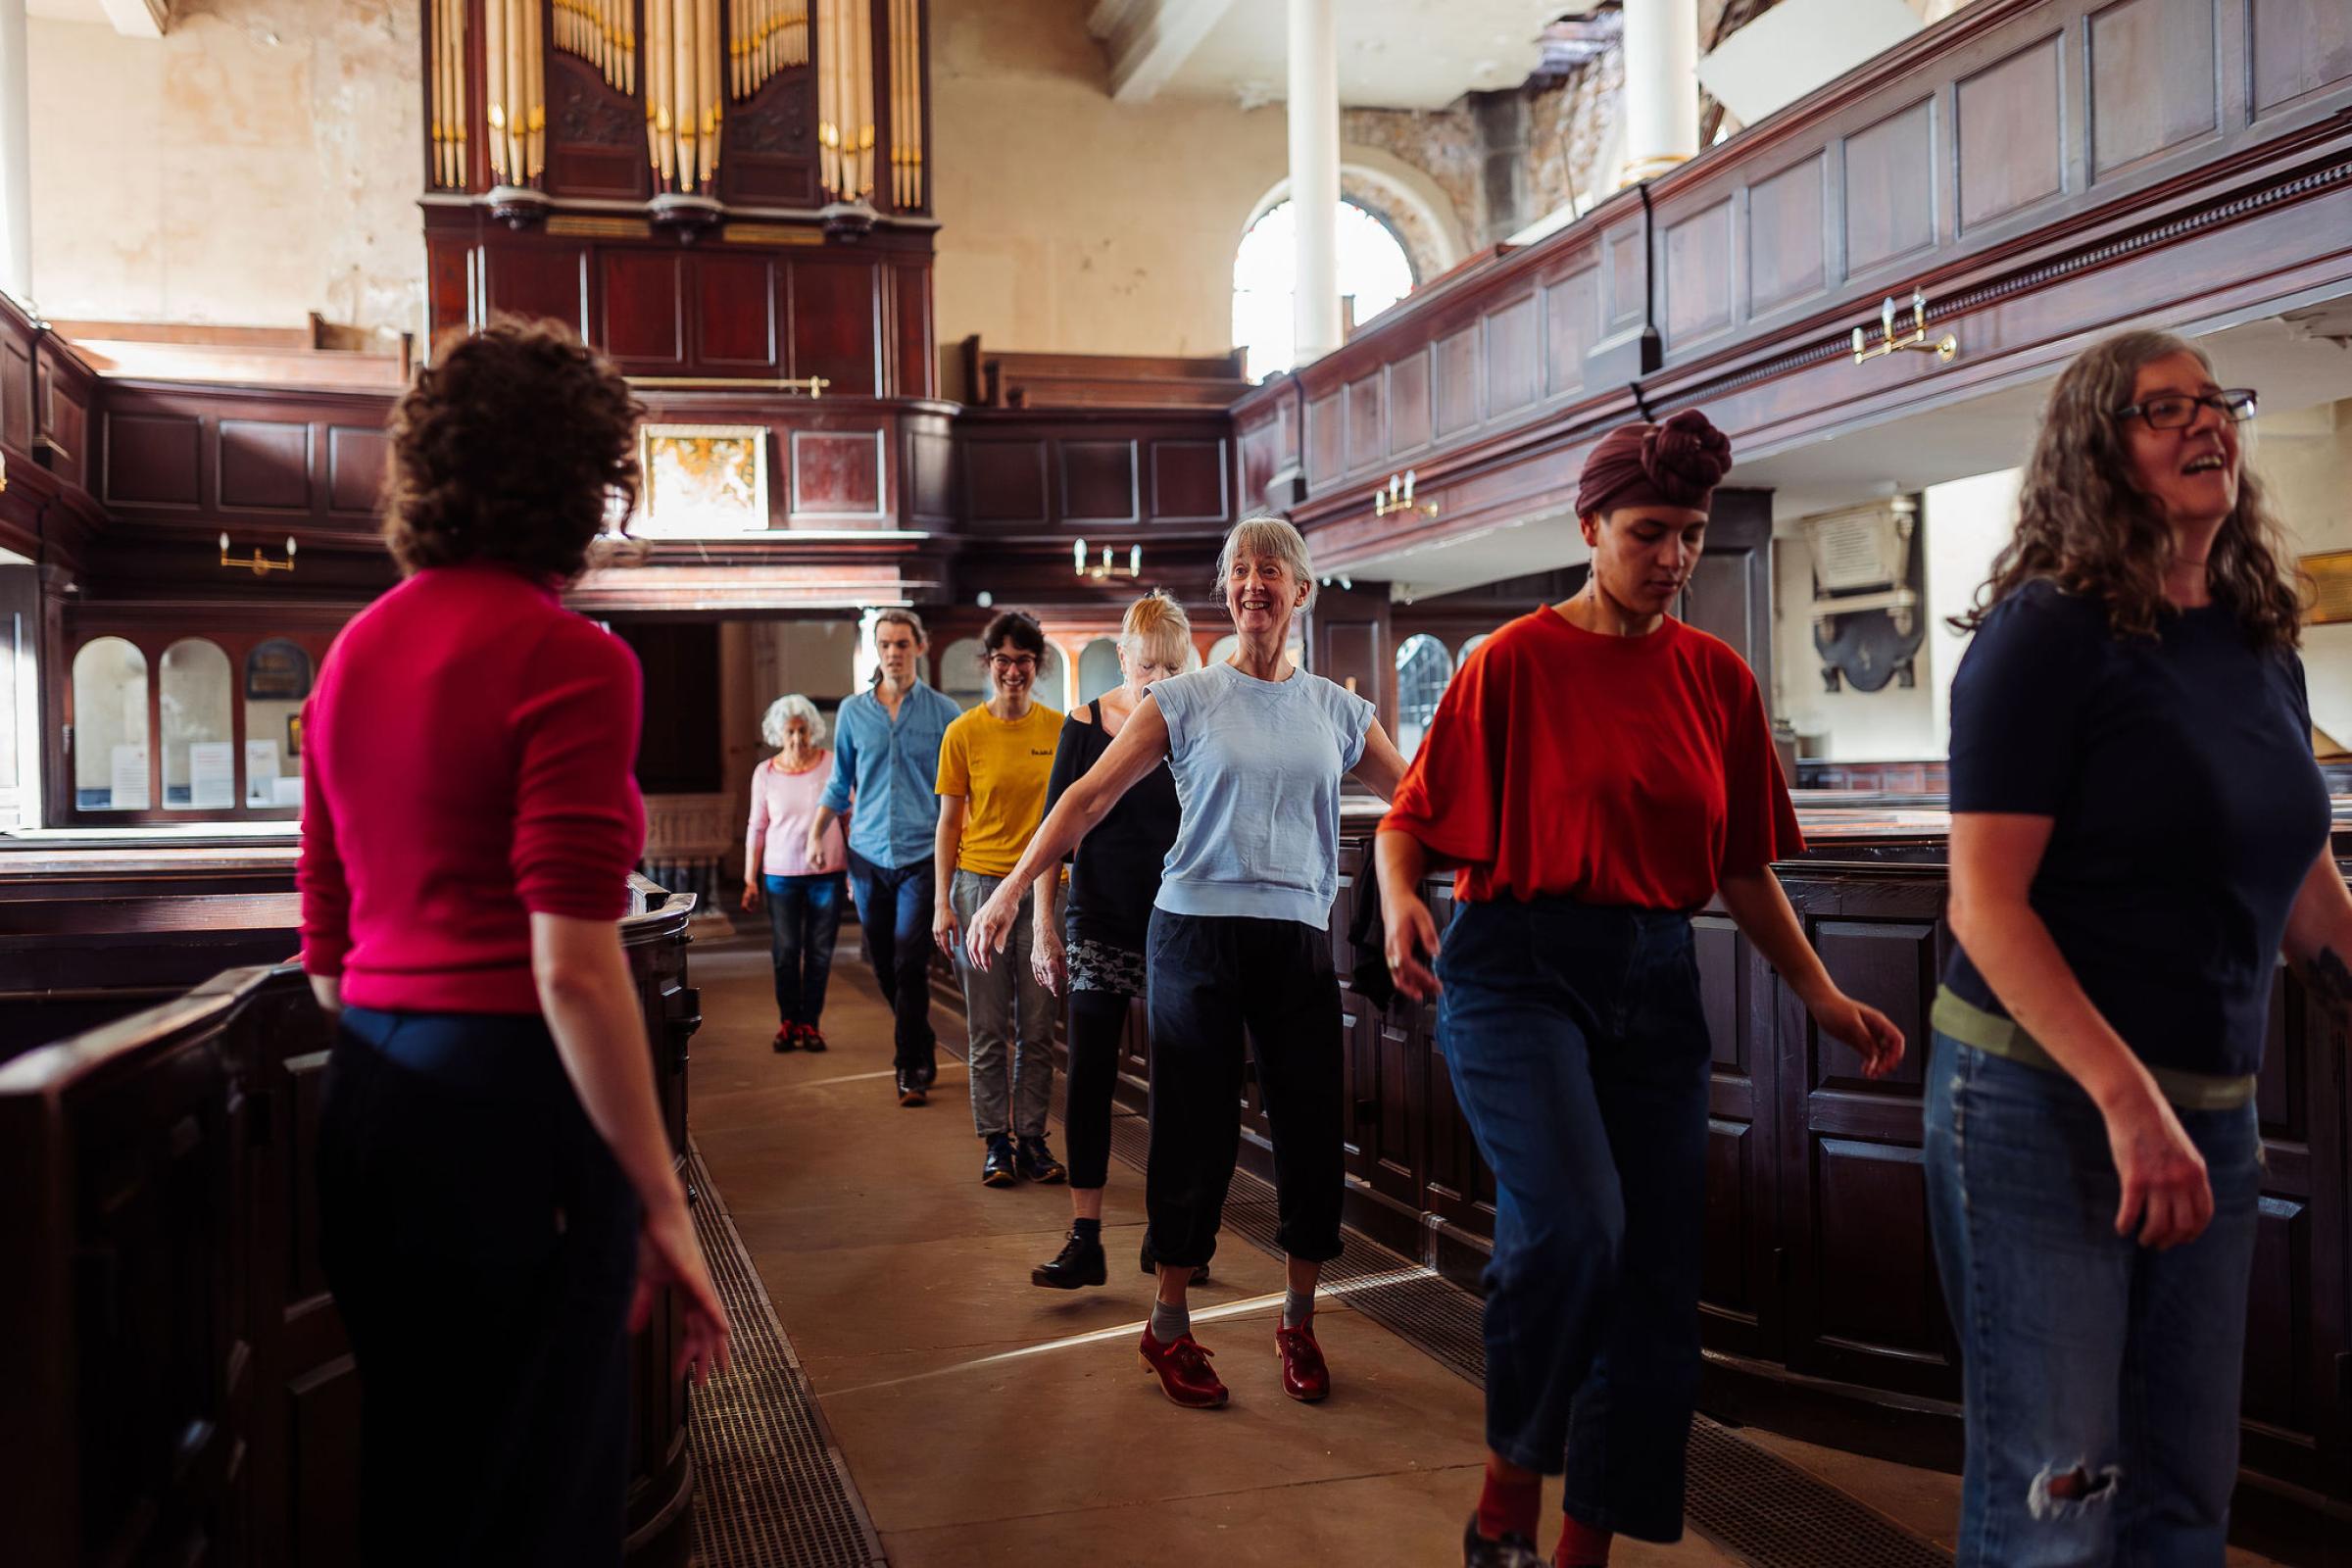 People clog dancing in an old church